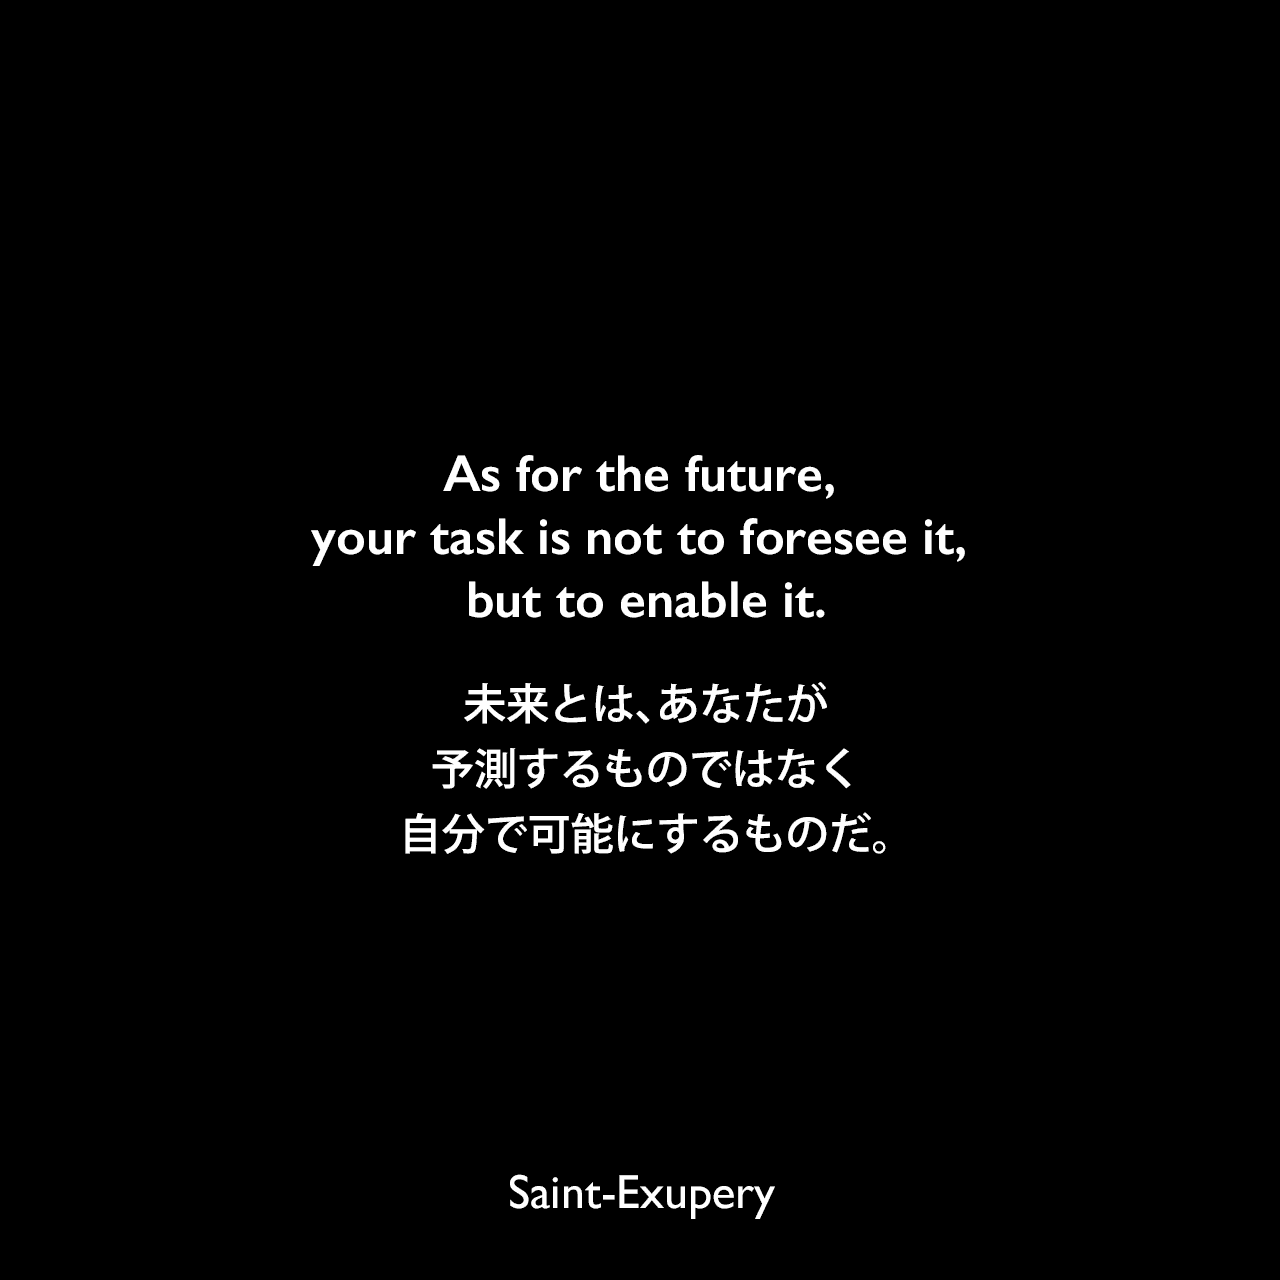 As for the future, your task is not to foresee it, but to enable it.未来とは、あなたが予測するものではなく、自分で可能にするものだ。Saint-Exupery